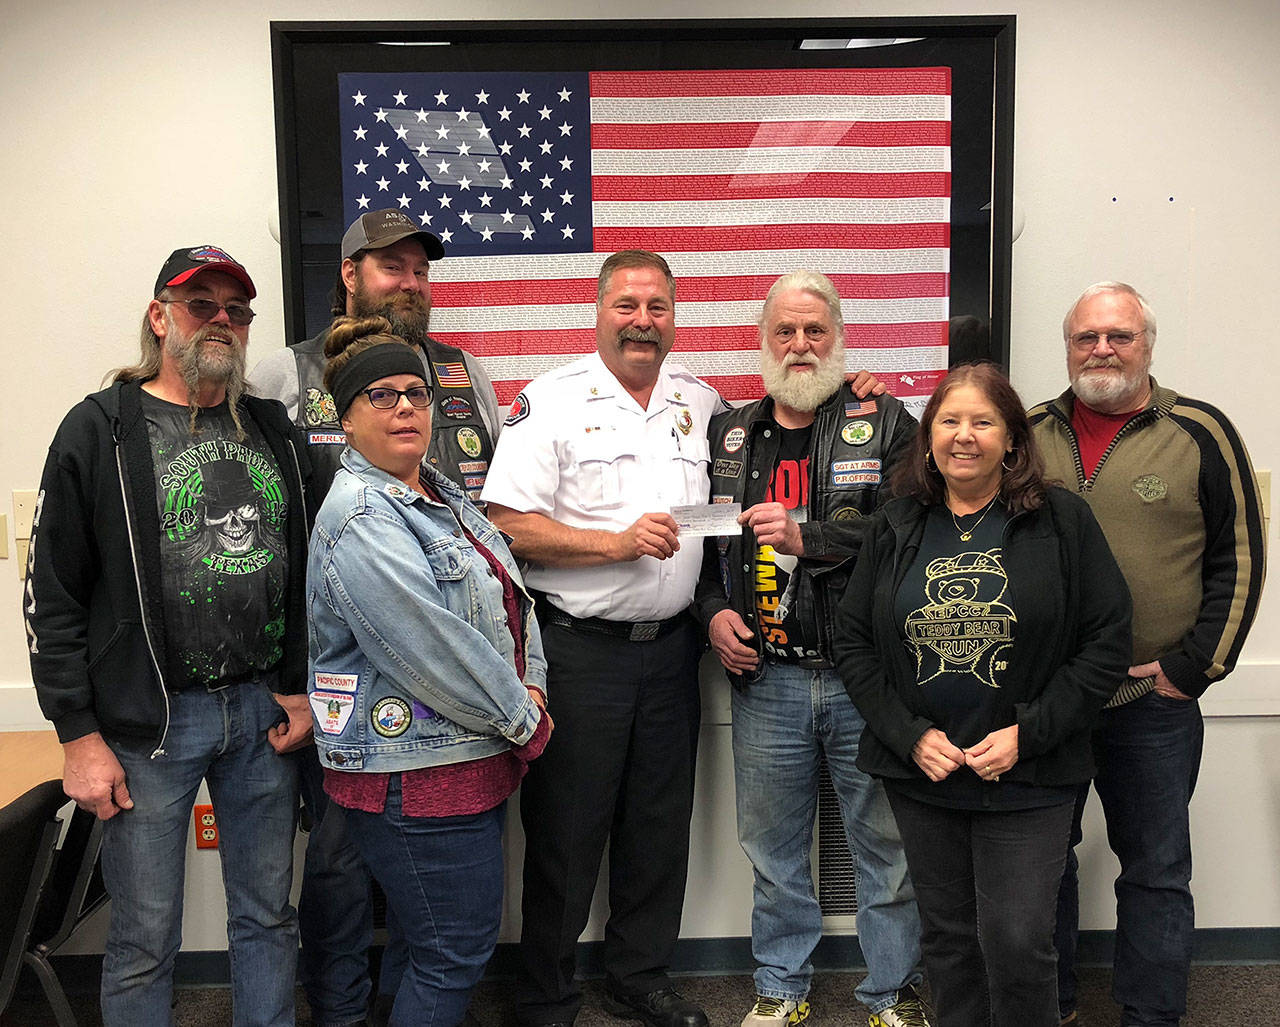 Left to right, ABATE Coordinator Ray Hash, Member Frankie McNeal, Deputy Coordinator Joe Cain, Fire Chief Bud Backer, Public Relations Chair Mitch Nelson, Secretary/Legislative Affairs Laura Cain, and Treasurer Chuck McNeal. Submitted photo